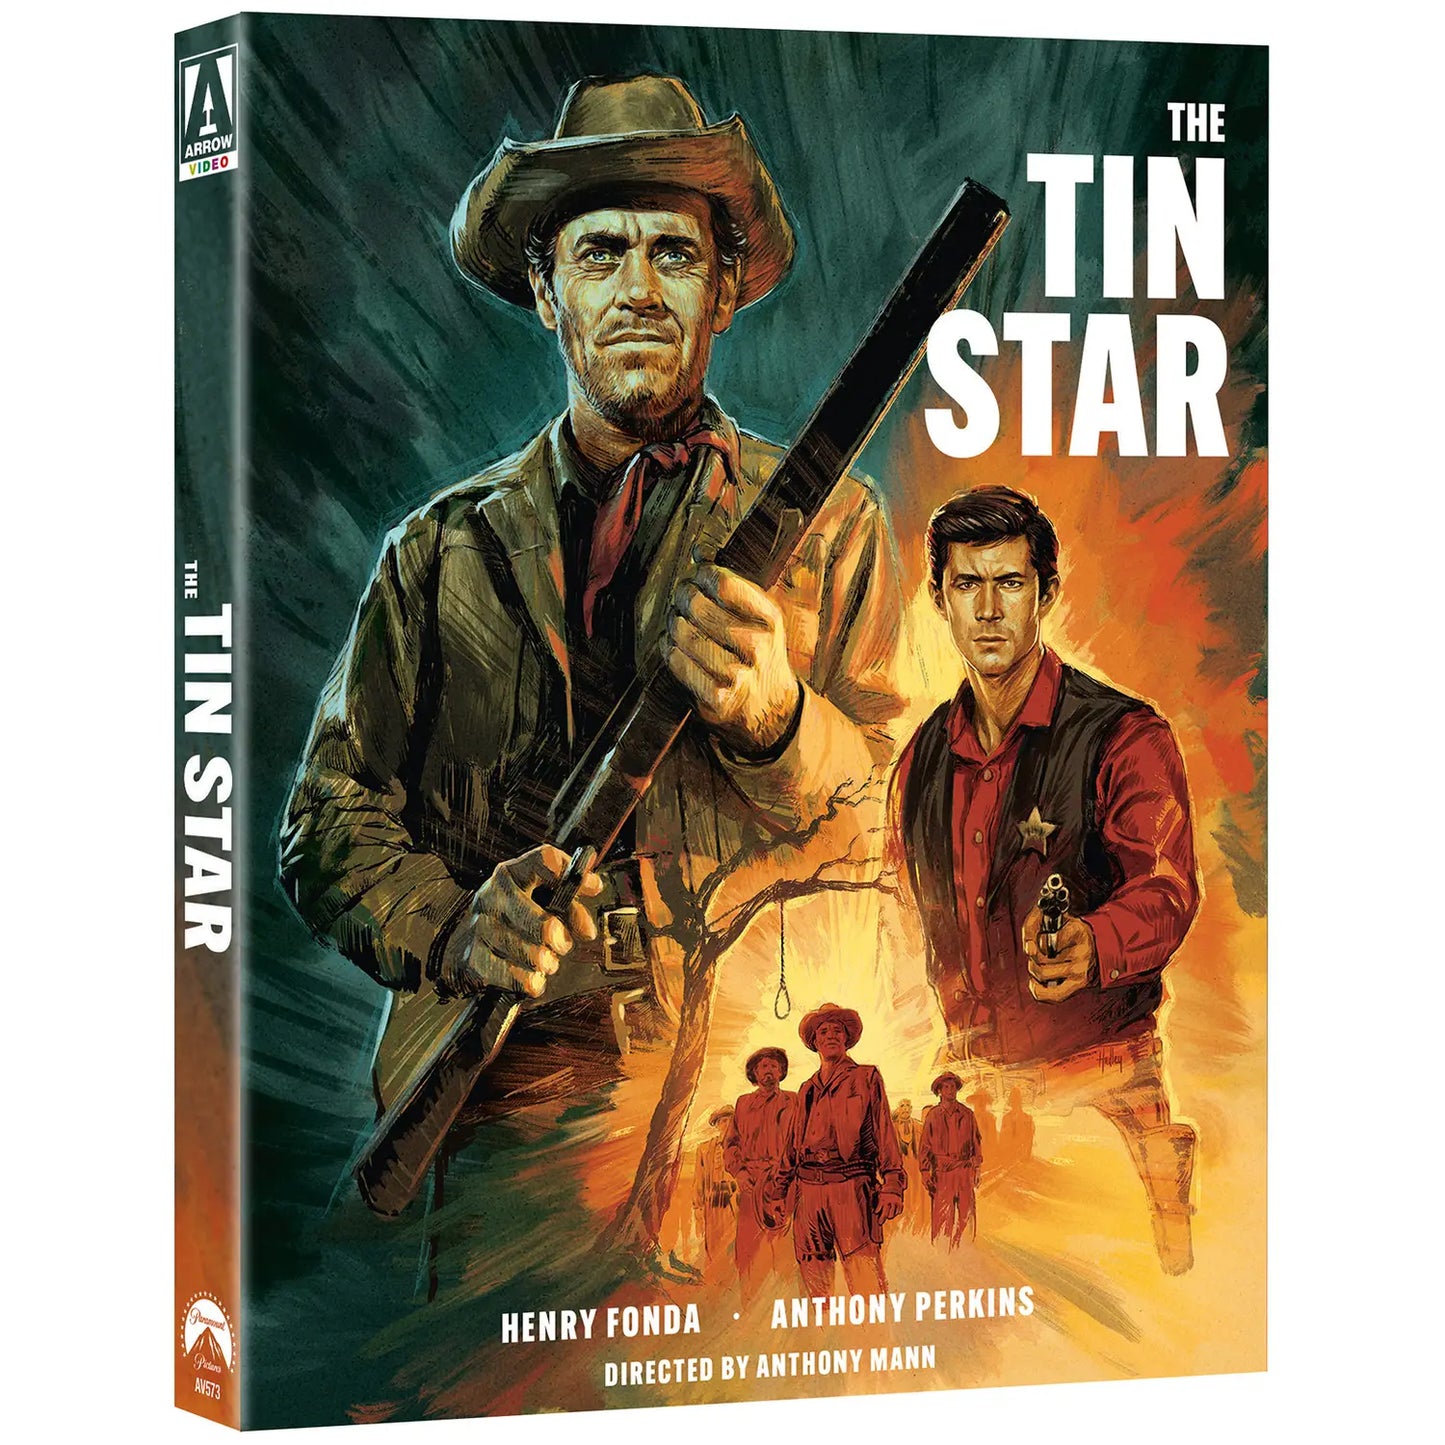 Tin Star Limited Edition Blu-ray with Slipcover (Arrow U.S.) [Preorder]